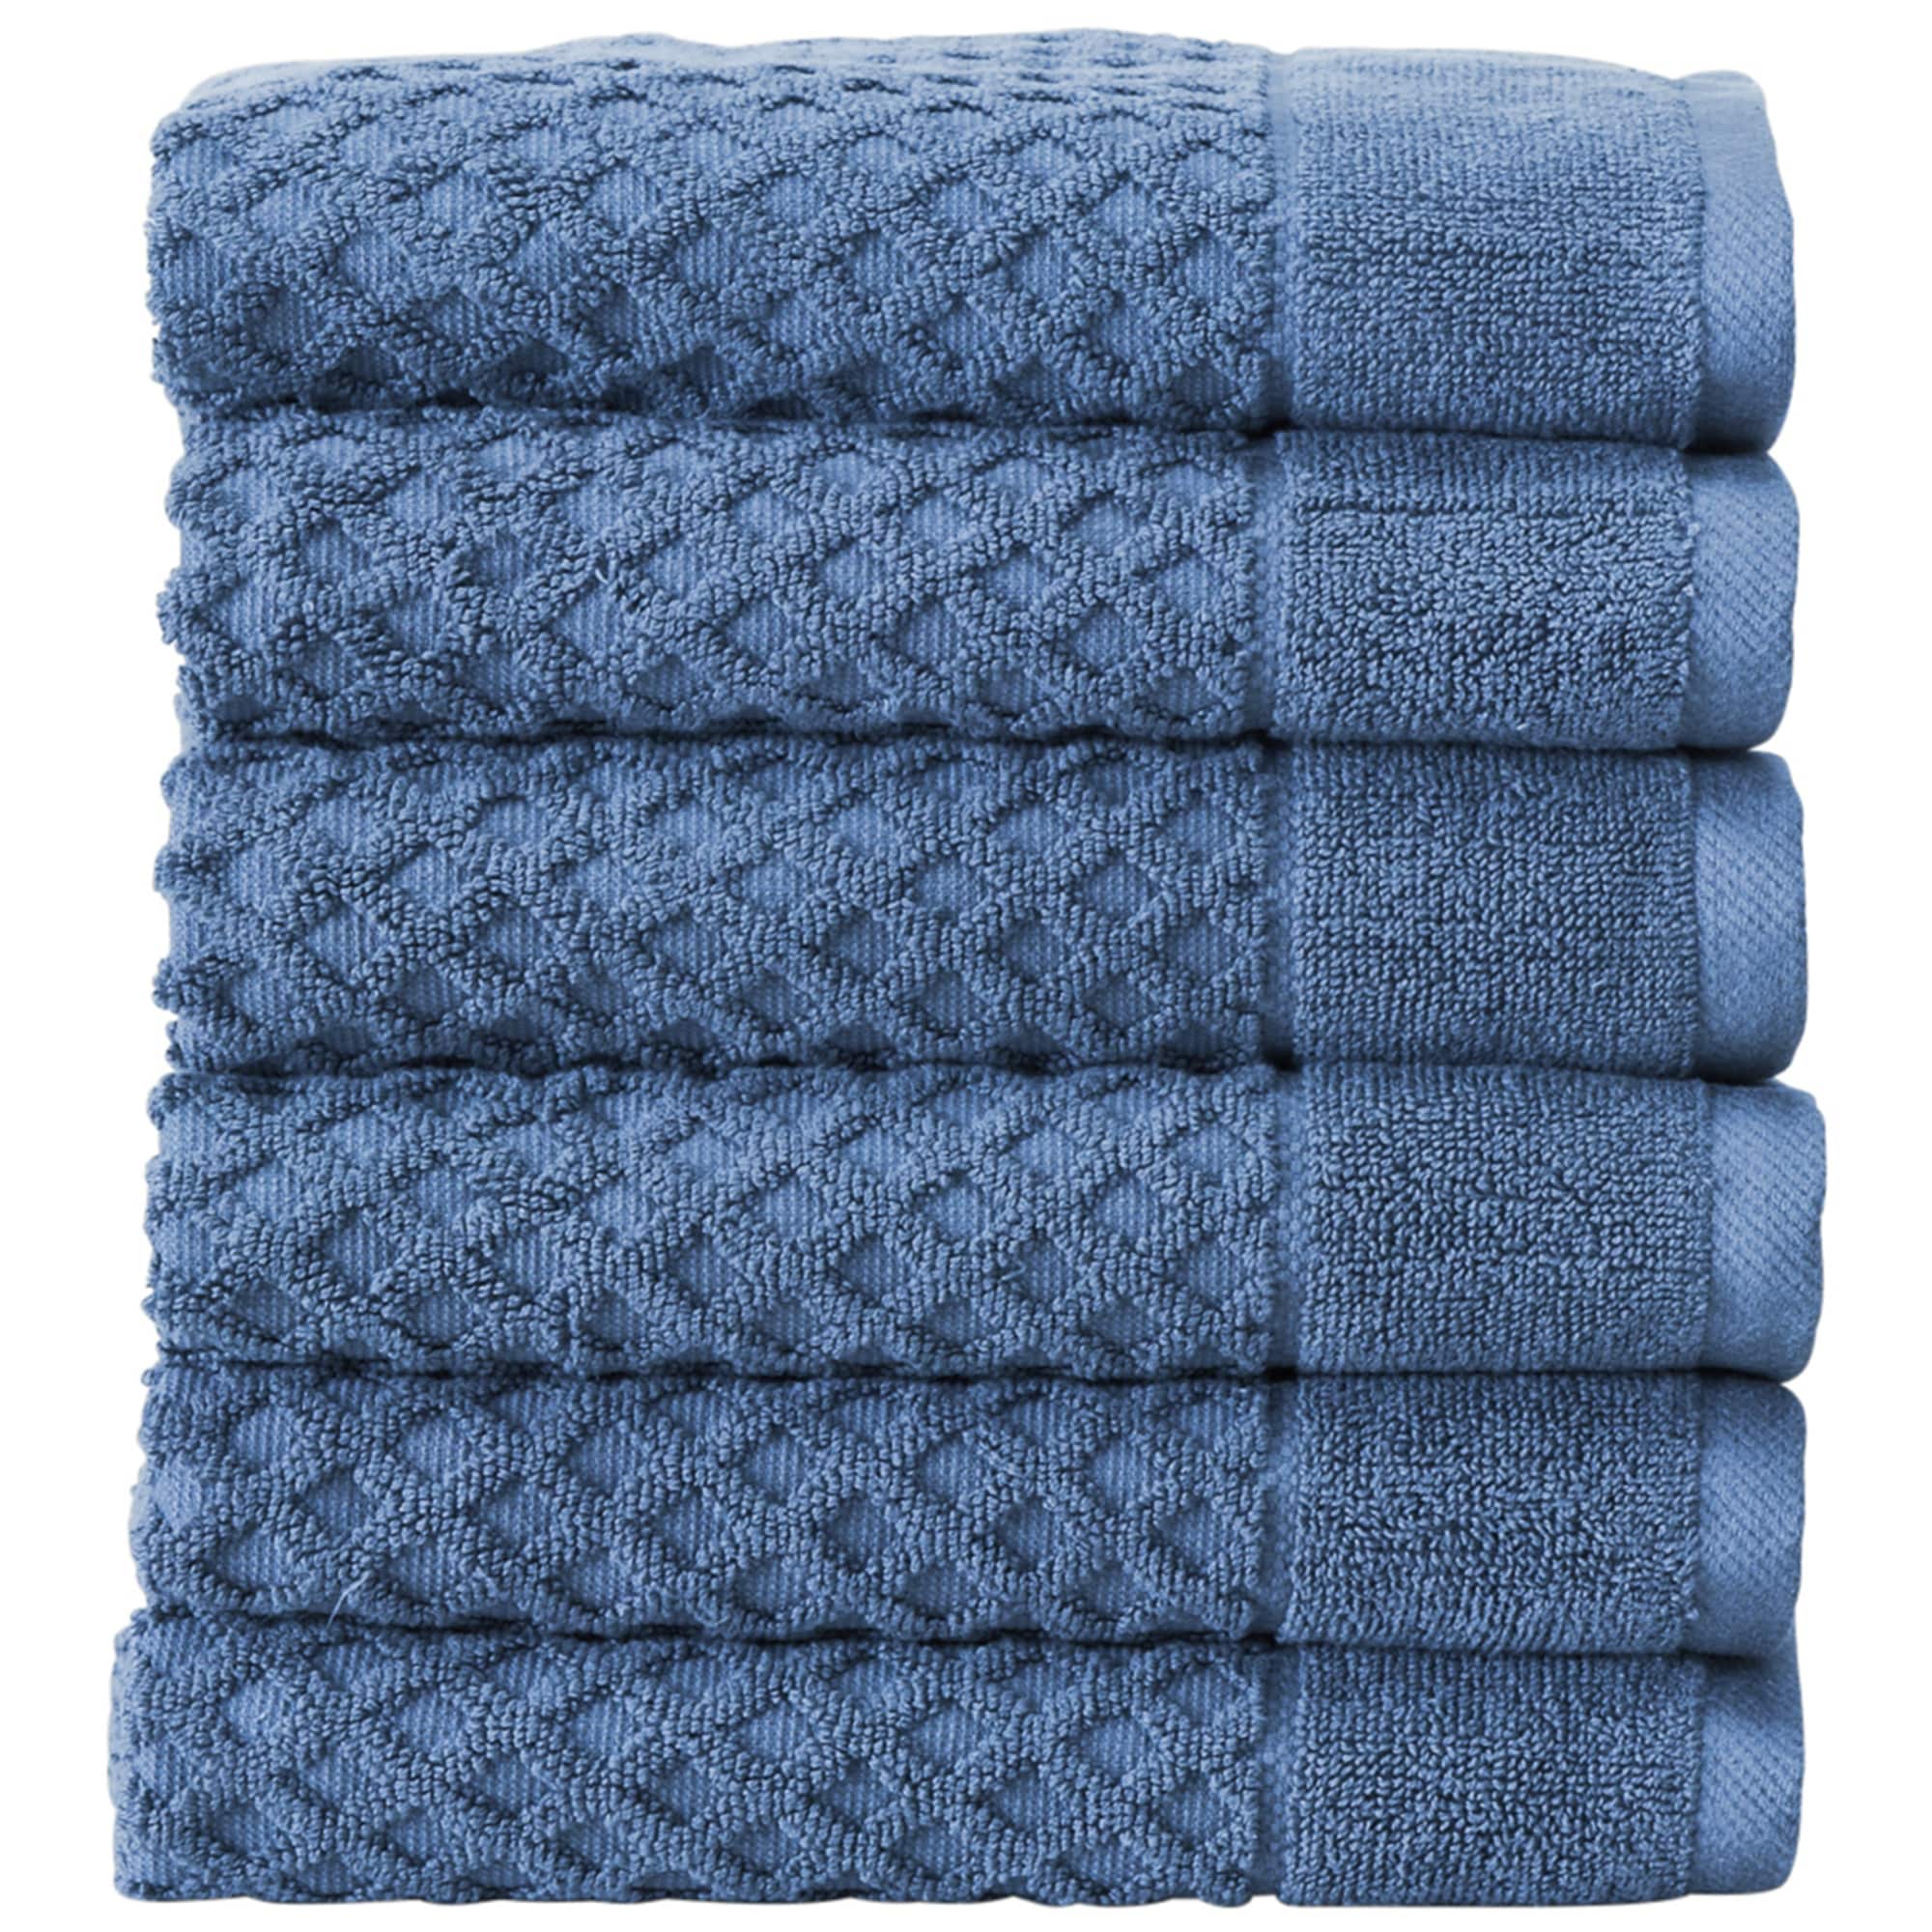 https://ak1.ostkcdn.com/images/products/is/images/direct/d736afb566f27db5c63bb13916684a051f9092a6/Great-Bay-Home-Cotton-Diamond-Textured-Towel-Set.jpg